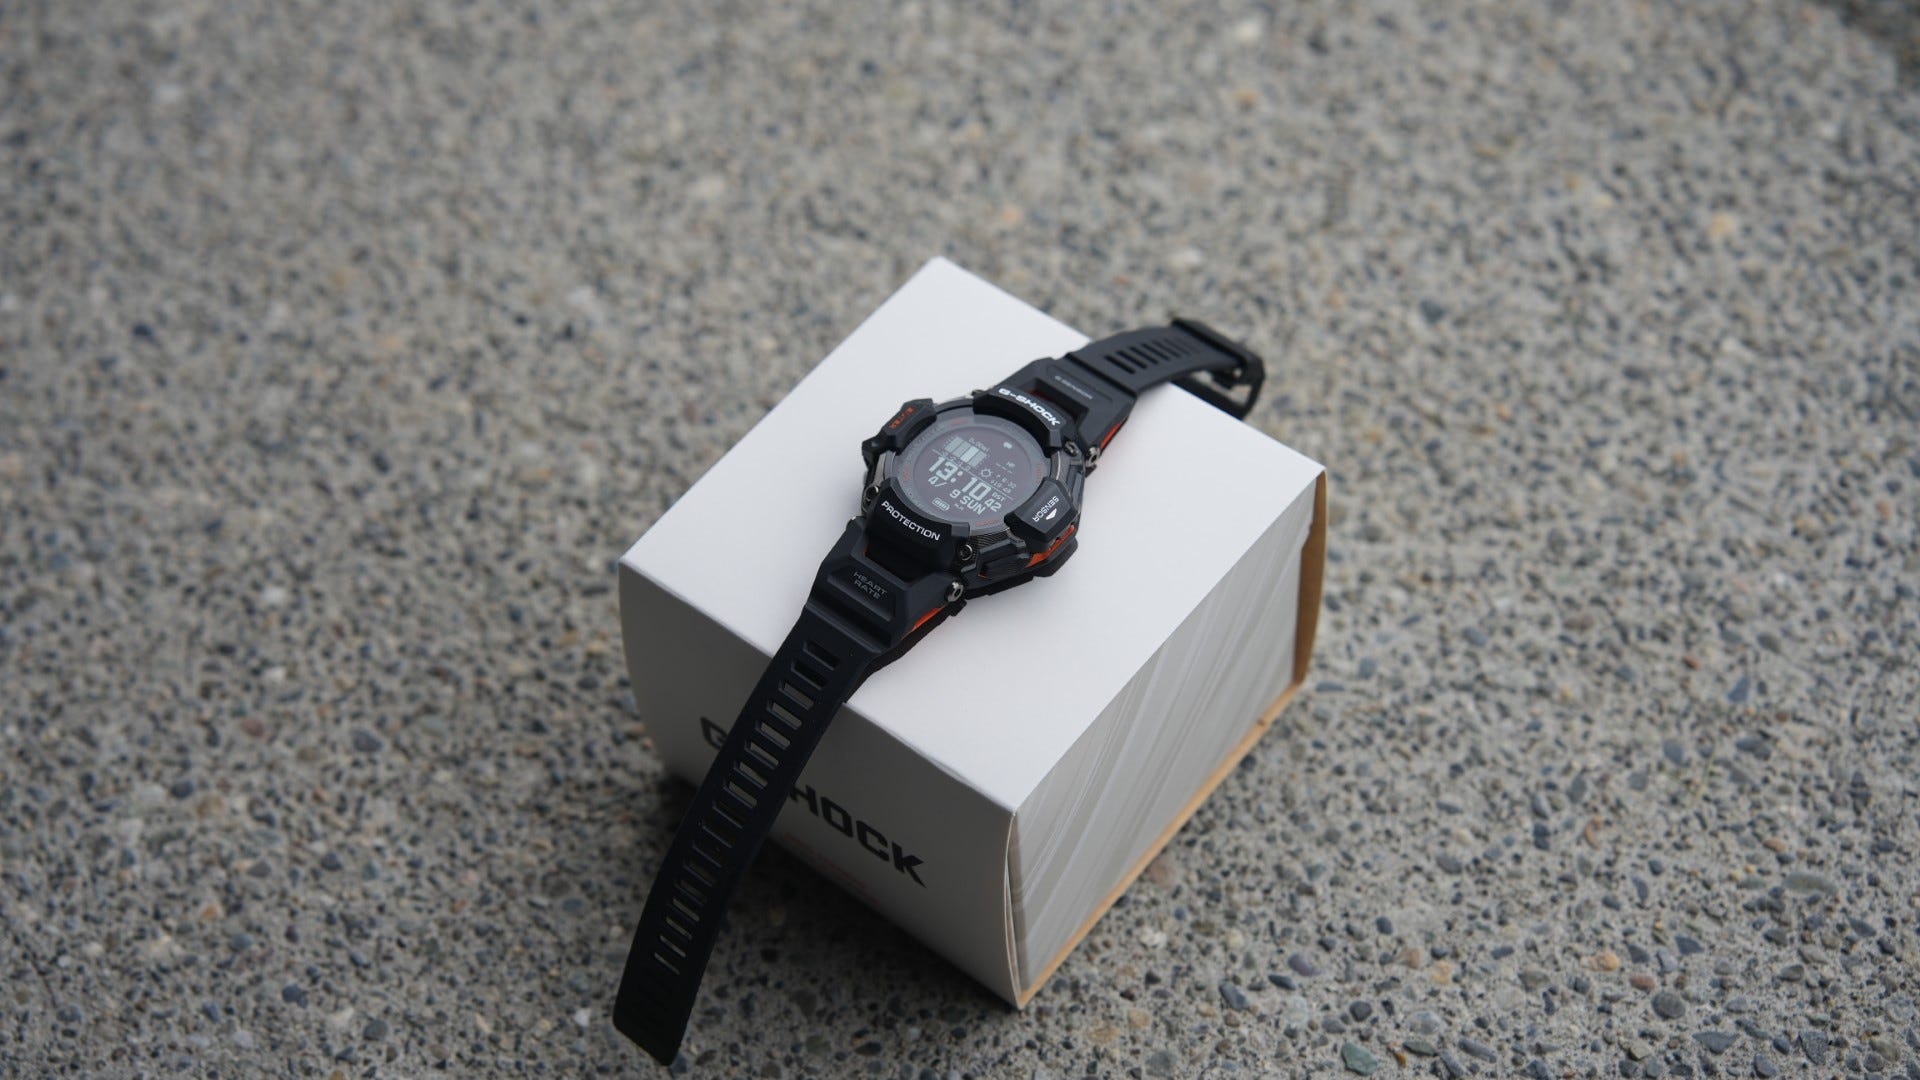 Casio G-SHOCK Move GBD-H2000 just rugged review: More a watch than